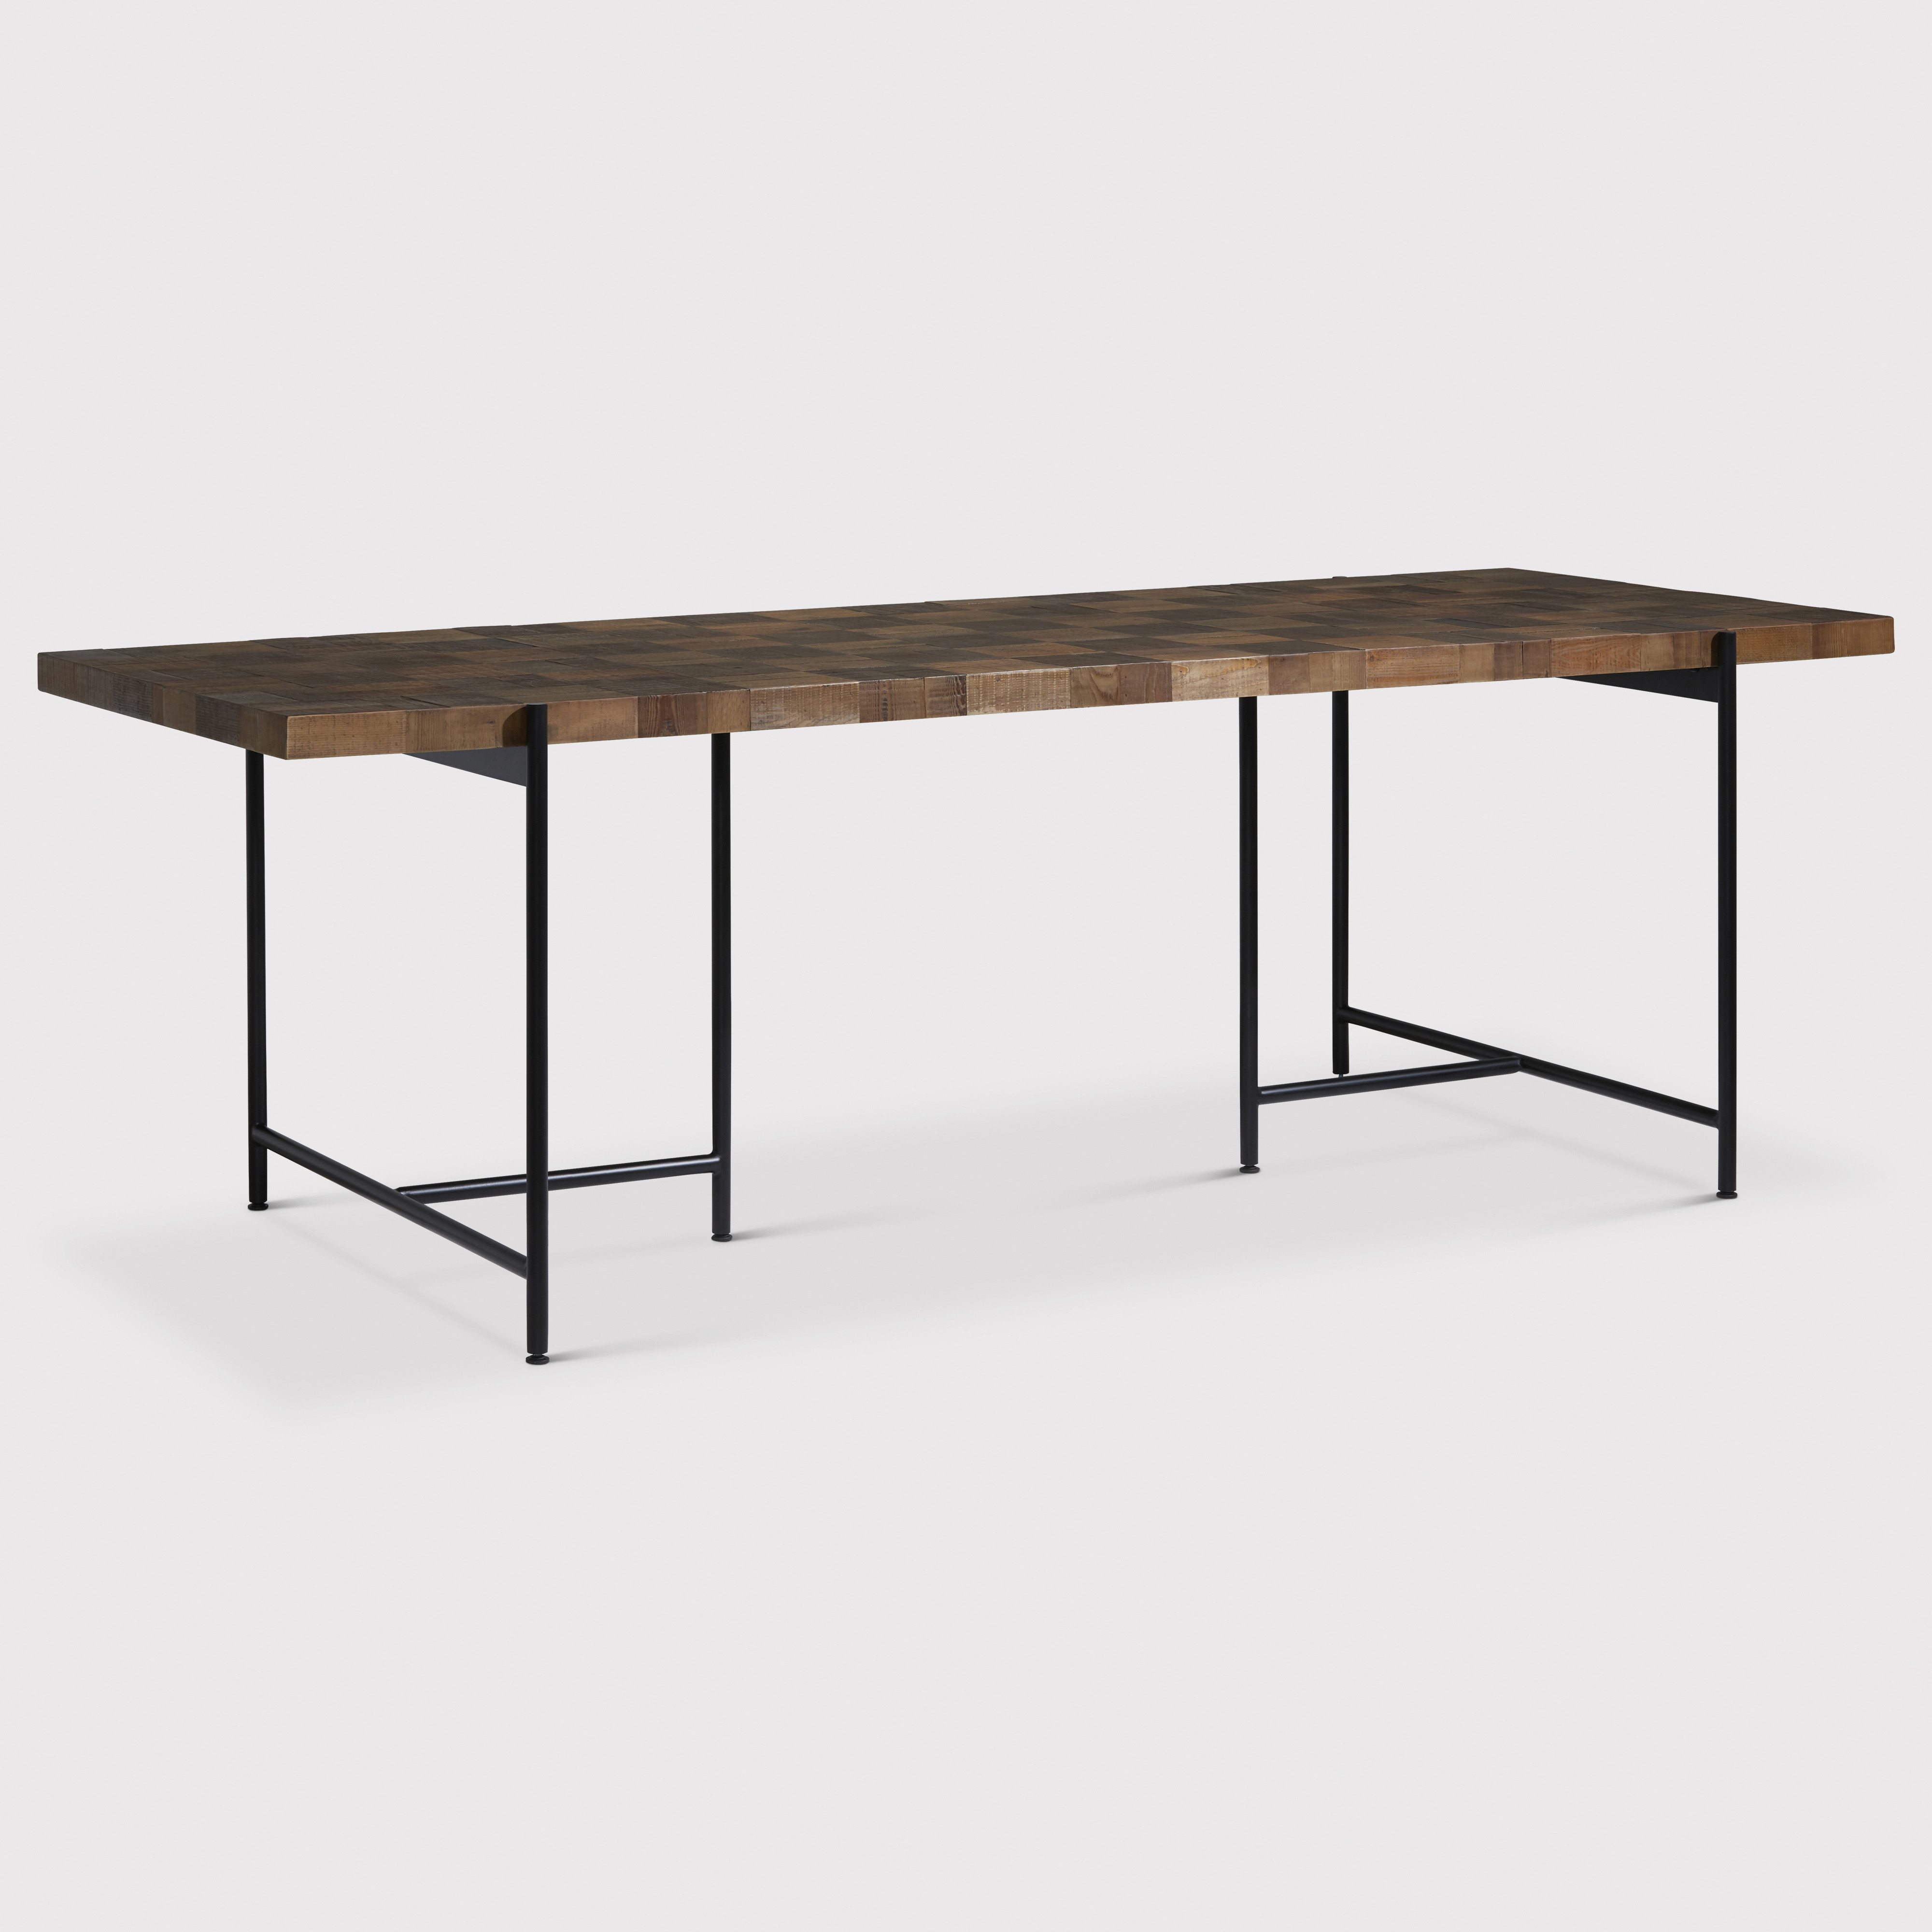 Bumi Dining Table 240cm, Pine Wood - Barker & Stonehouse - image 1